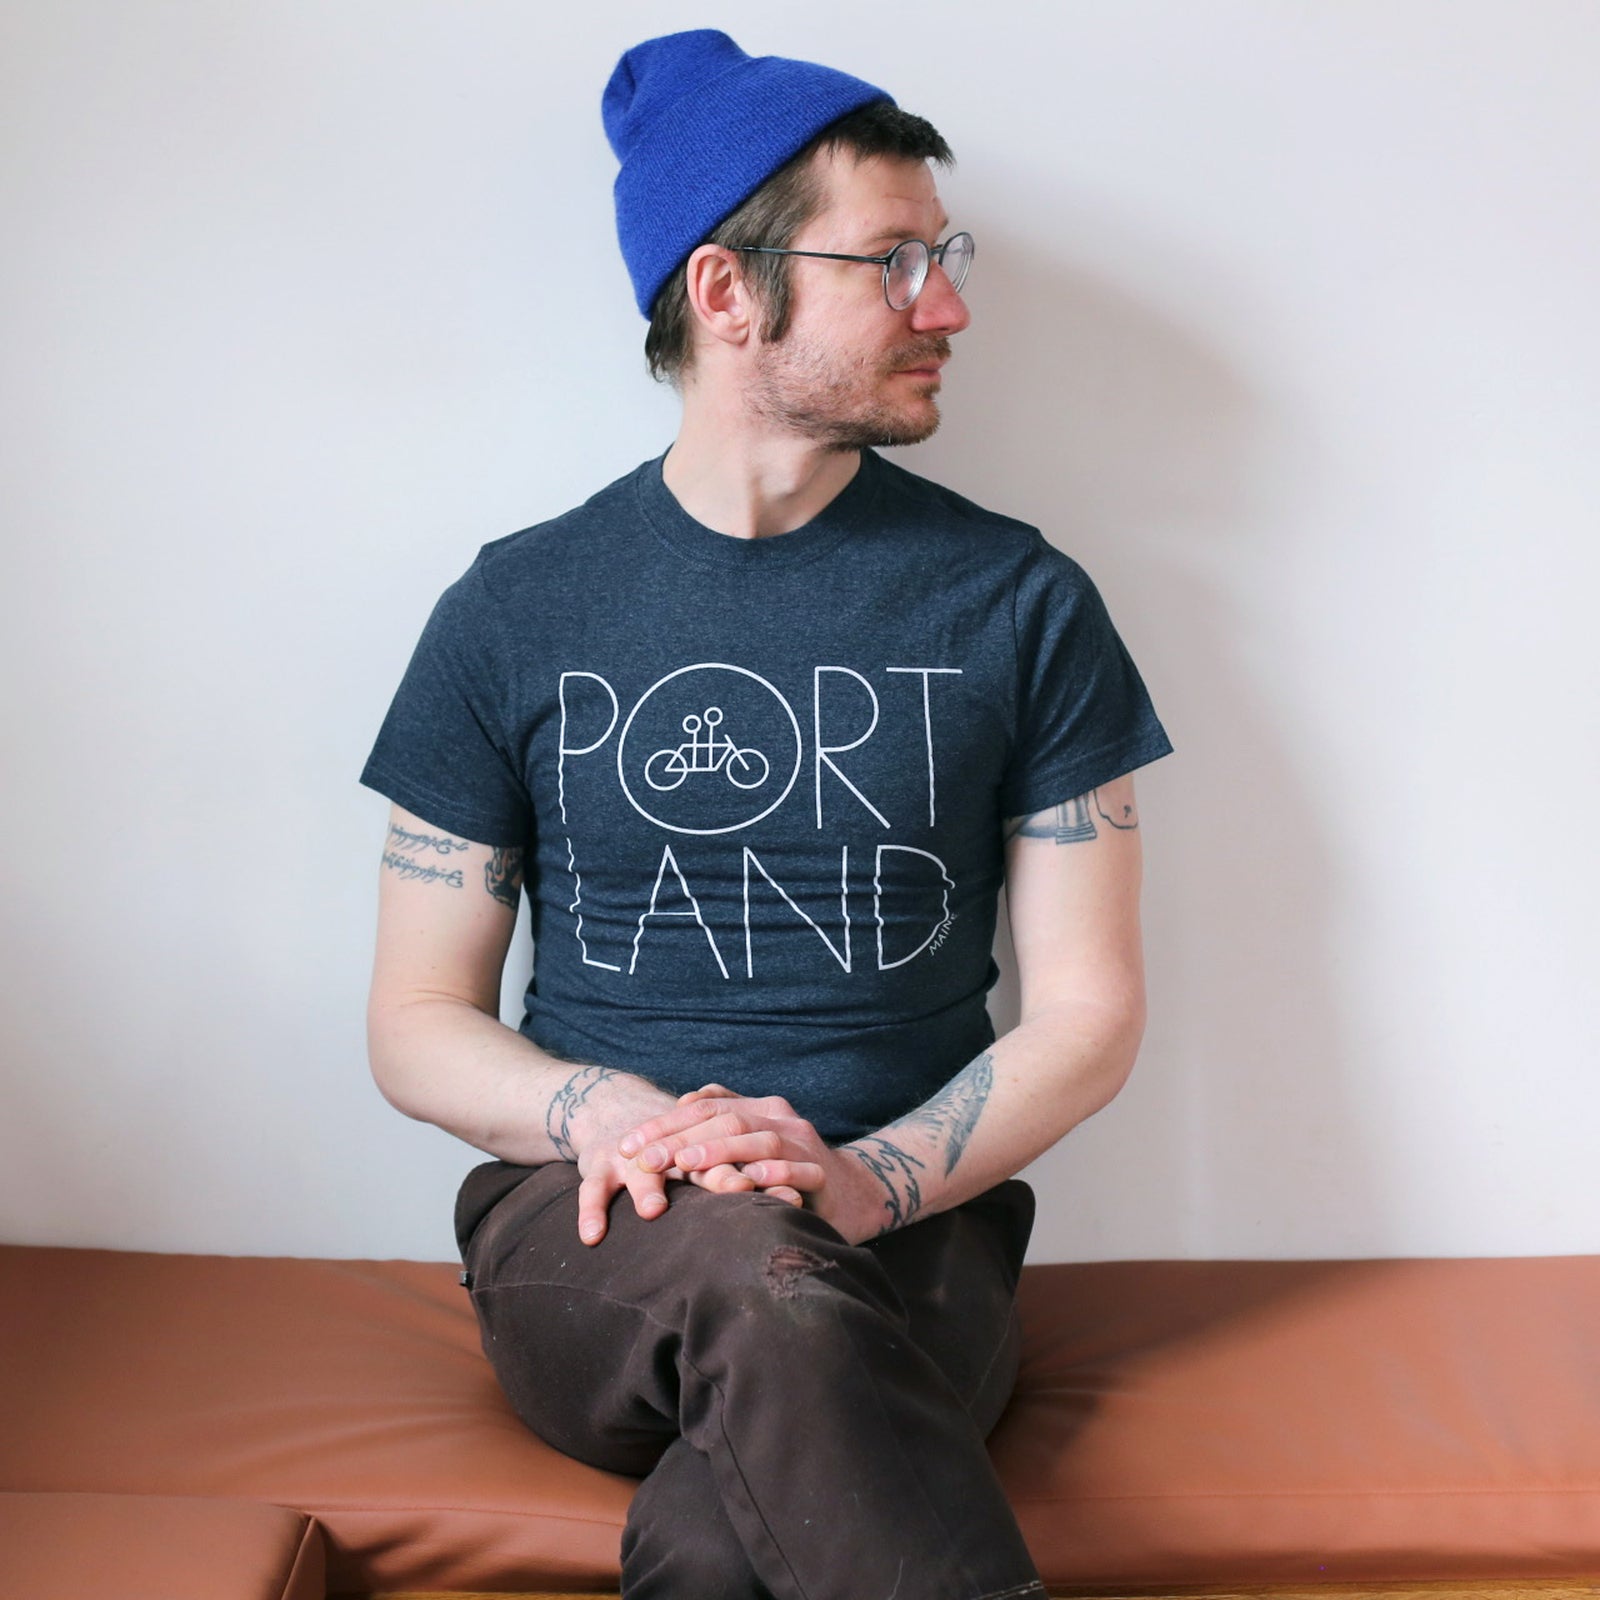 A man wearing a blue beanie and a Recycled Portland Tee from Tandem Coffee Roasters sits cross-legged on a brown surface against a white wall, looking at the camera.